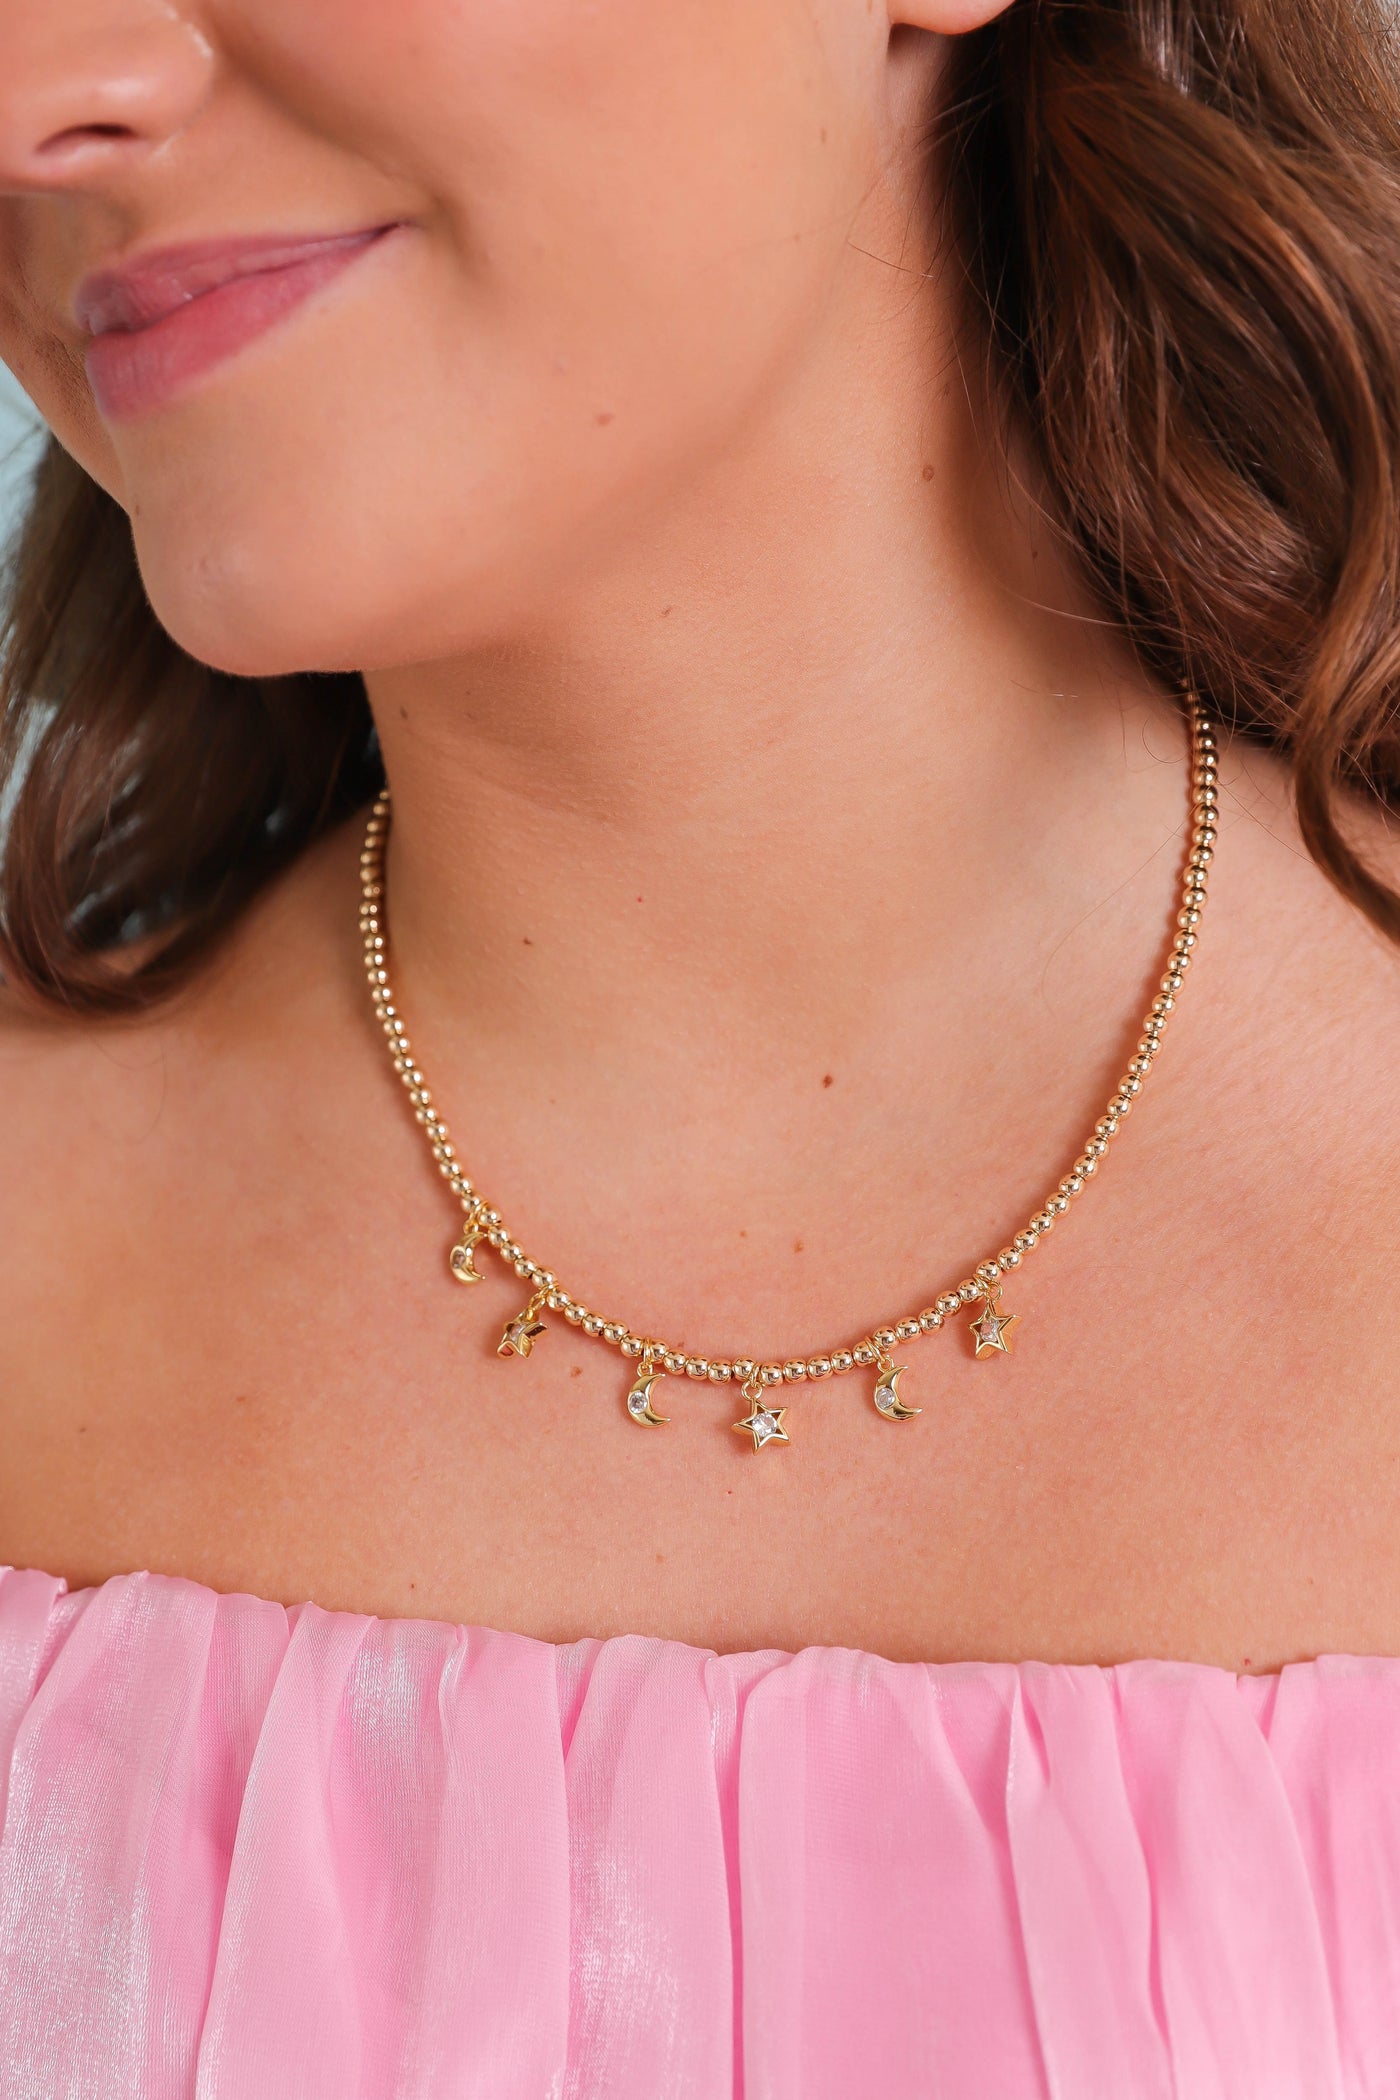 Gold Plated Charm Necklace- Gold Plated Beaded Necklace- OMG Blings